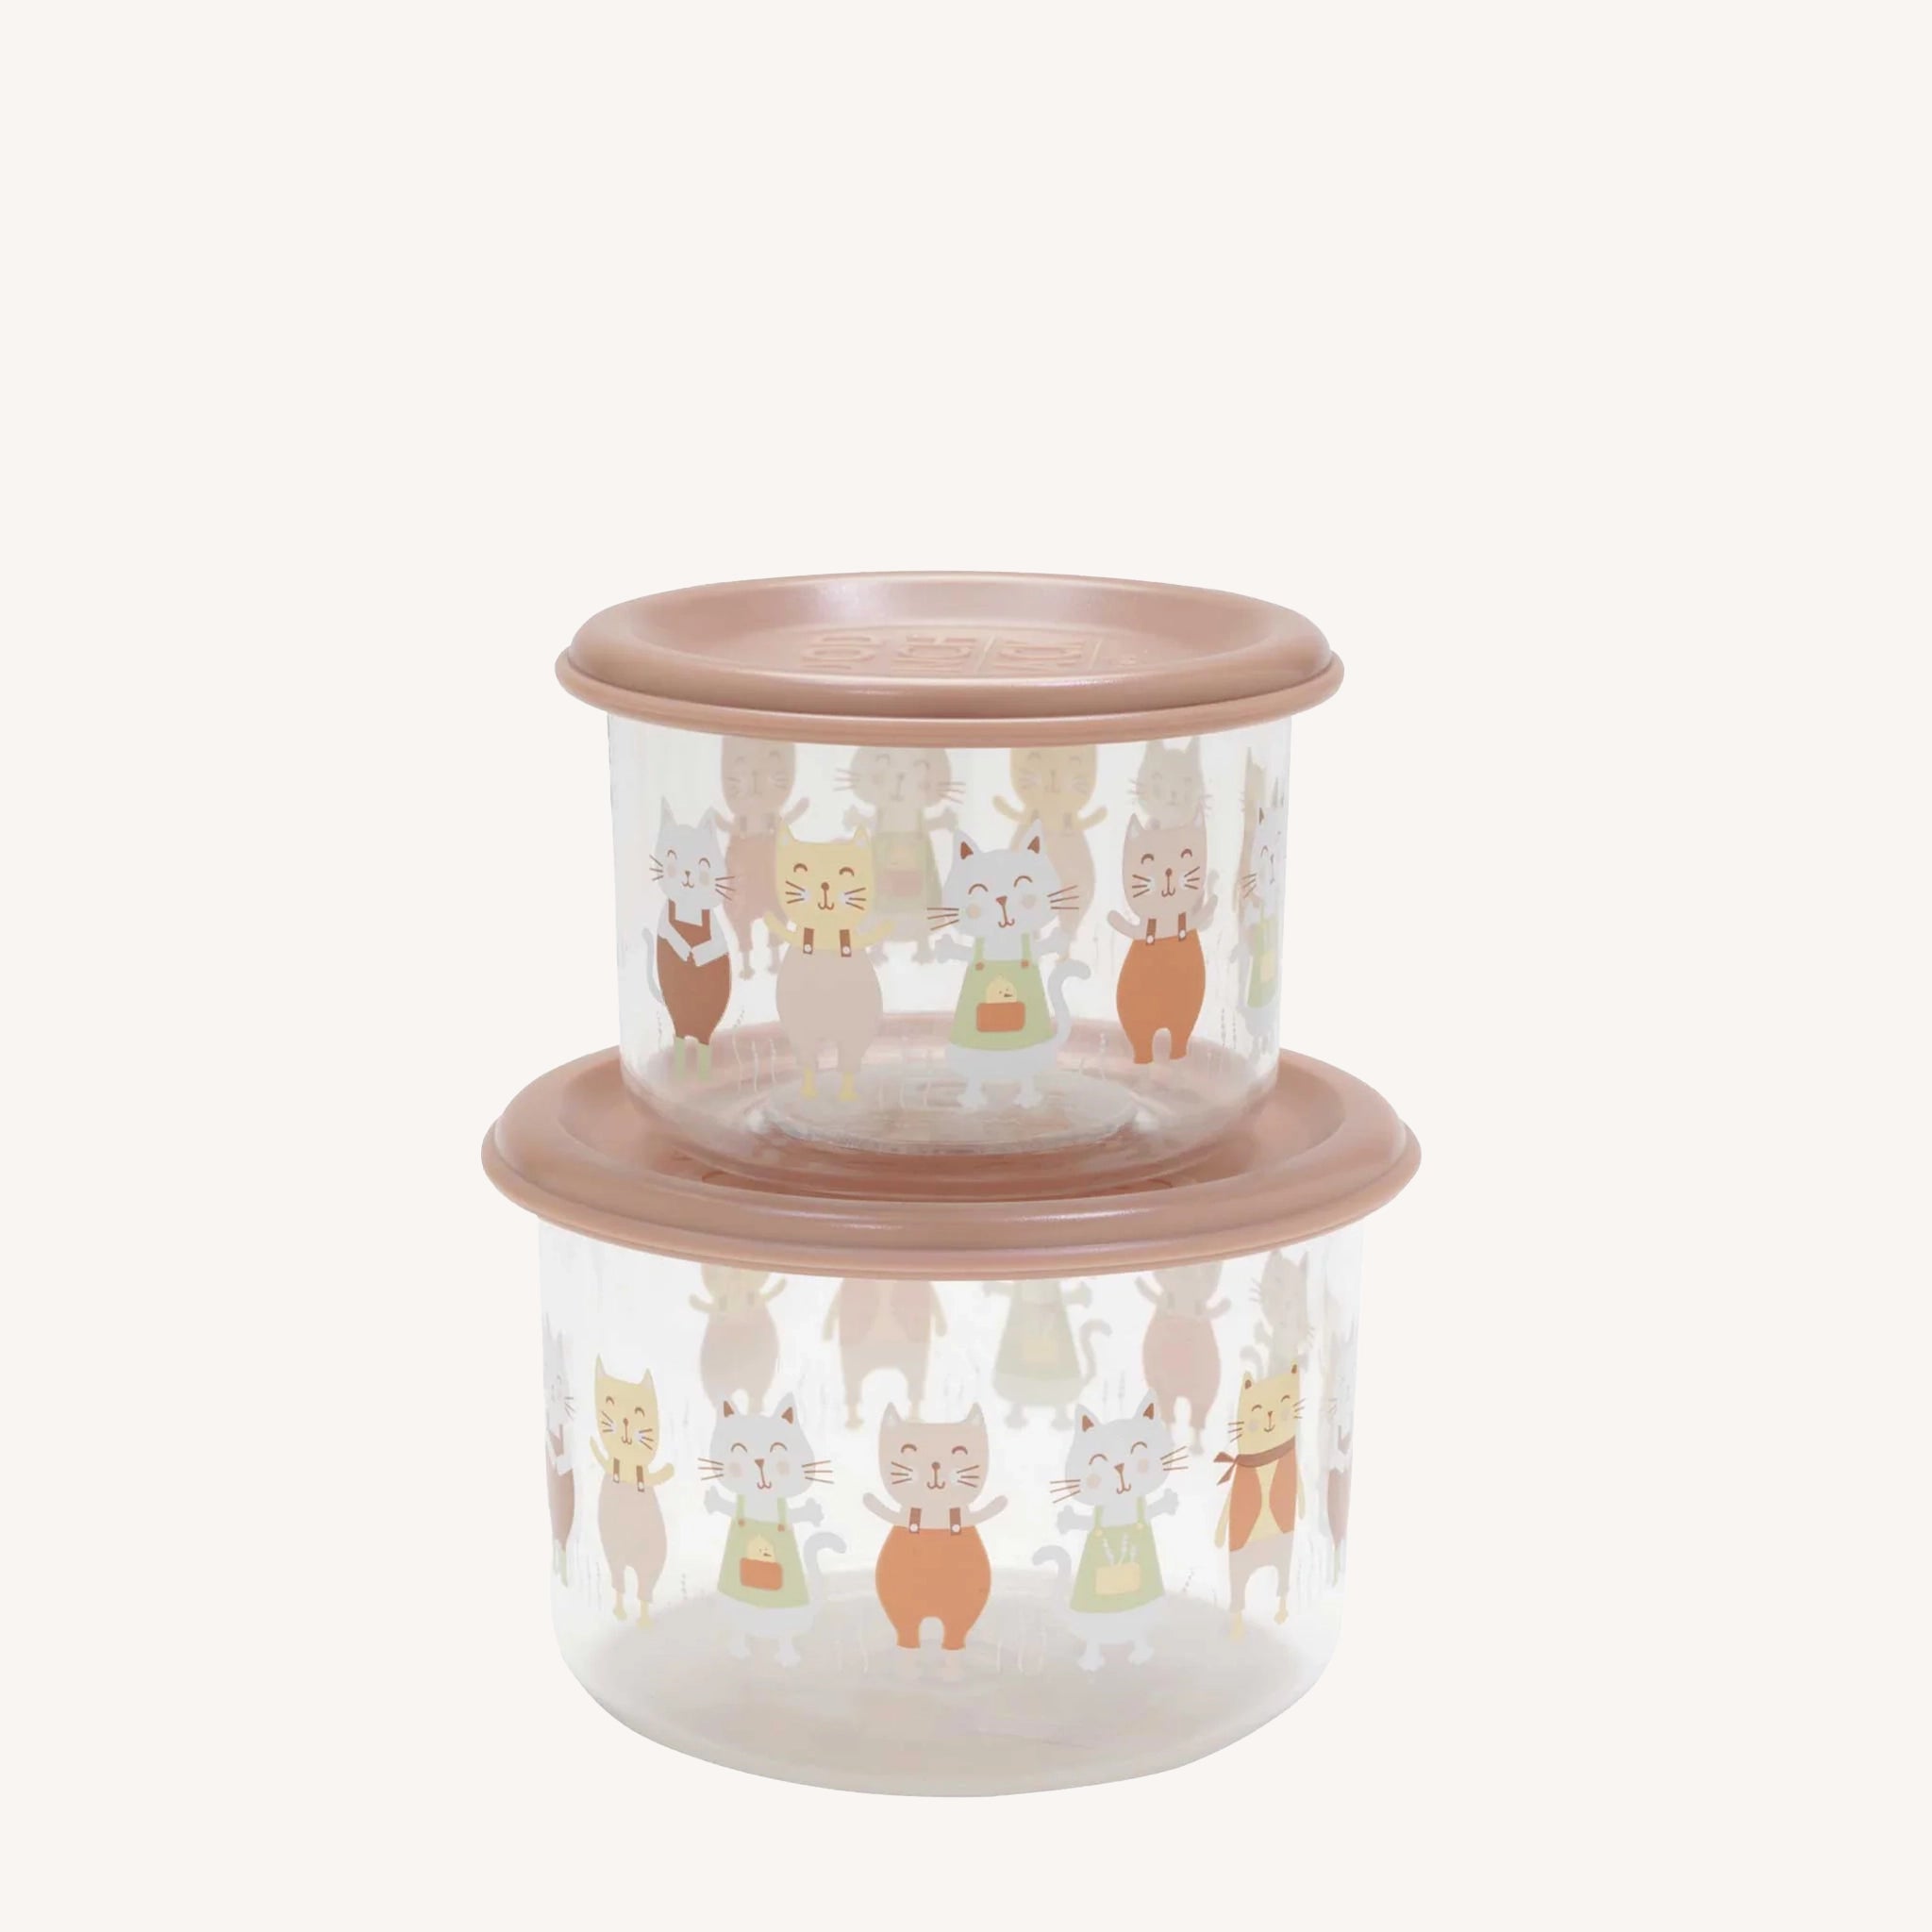 https://cdn.shopify.com/s/files/1/0350/5665/products/prairie-kitty-snack-containers.webp?v=1680539391&width=2048